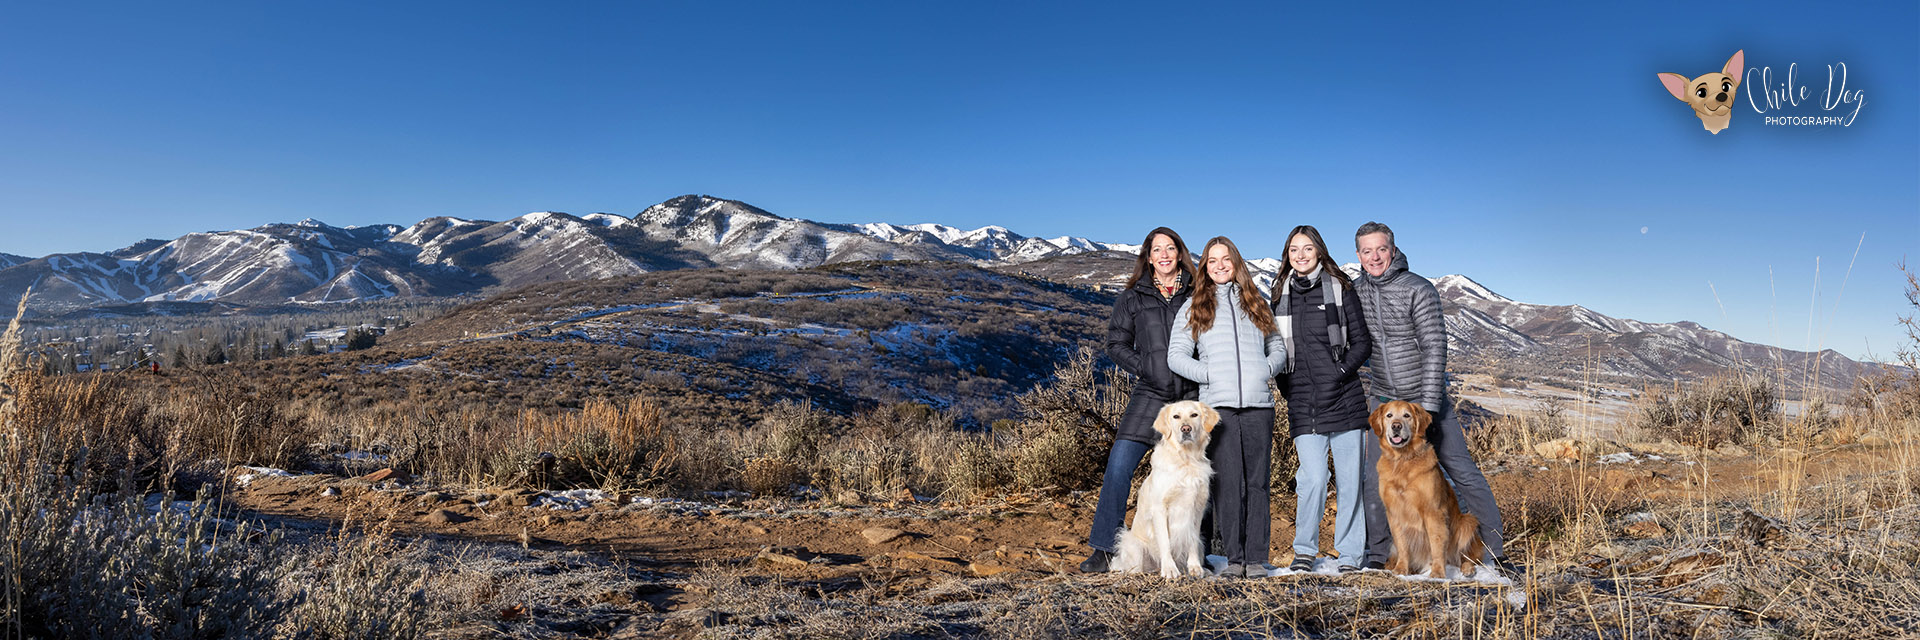 Panoramic family portrait in fron of the Park City Mountain ski slopes with a Golden Retriever and an English Cream Retriever.